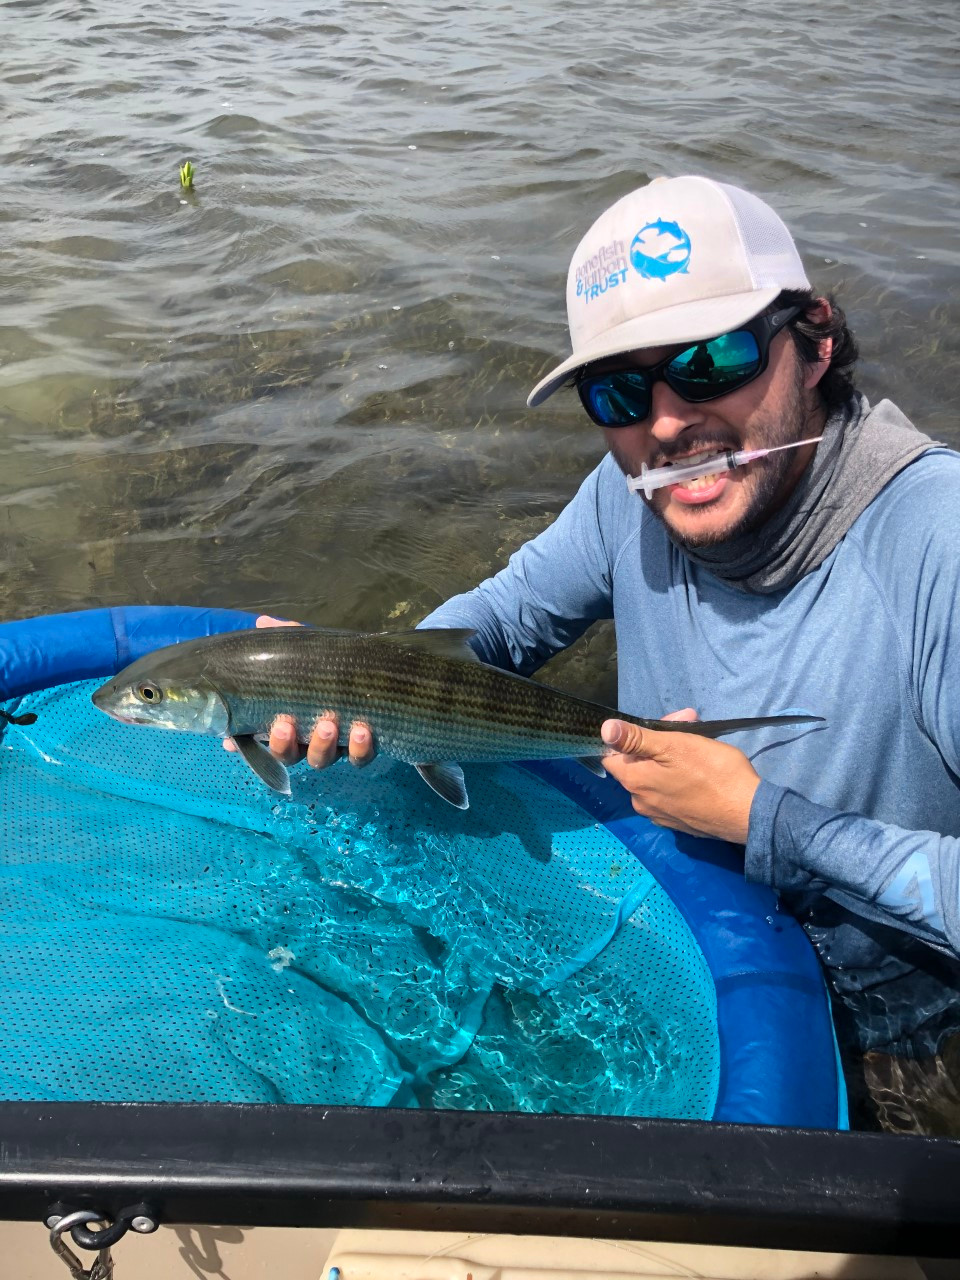 A quick glance at the camera before collecting a nonlethal blood sample from a South Florida bonefish, investigating the presence of pharmaceutical contaminants in a coastal marine fish species